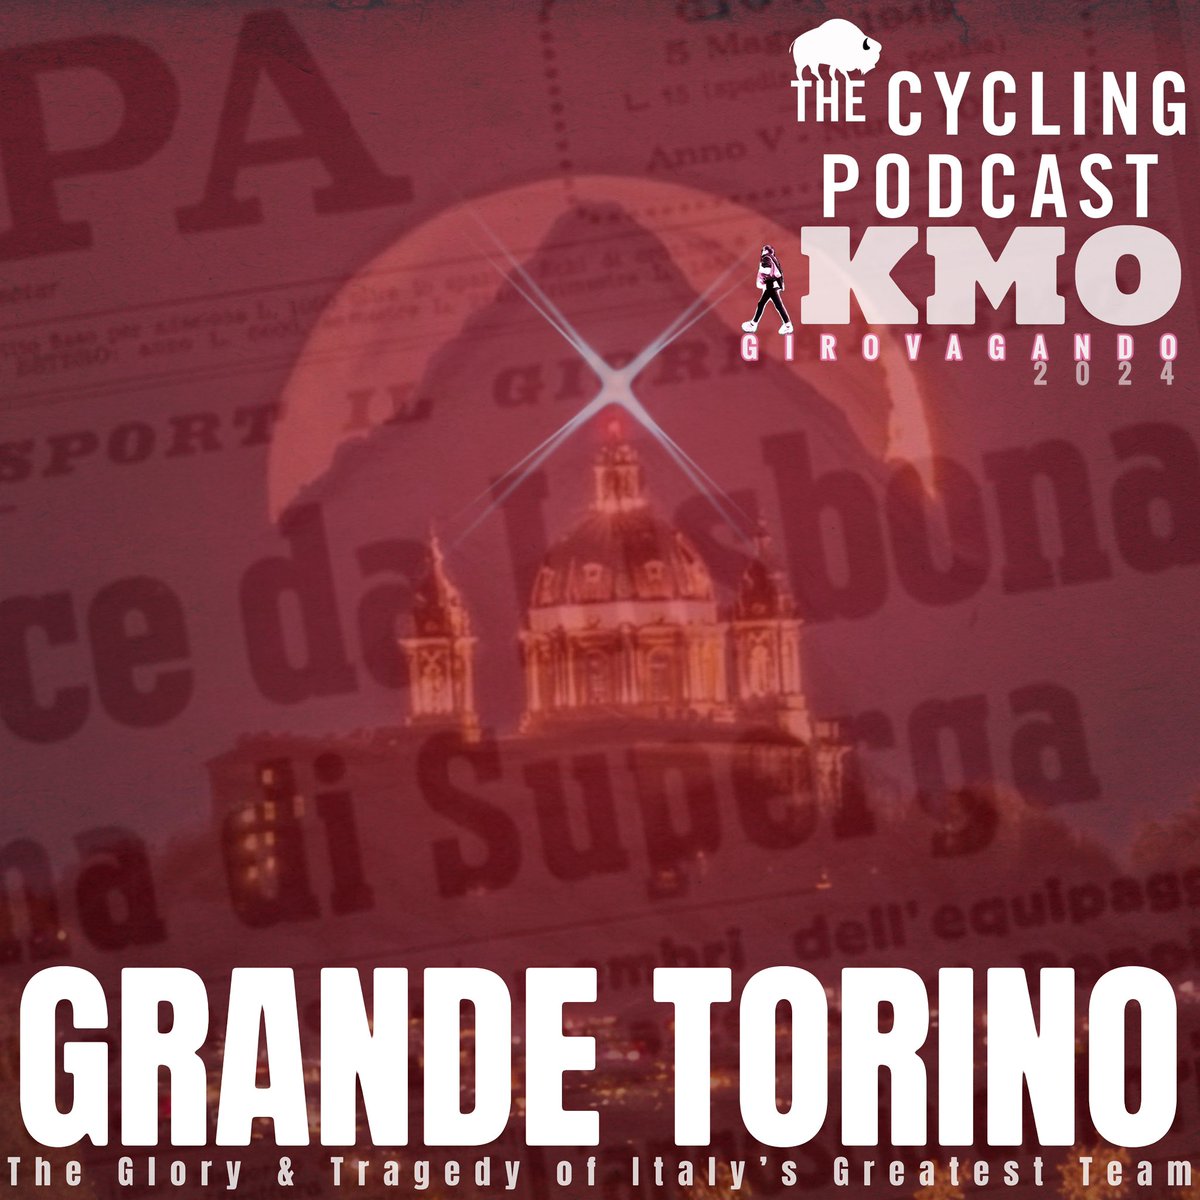 Mad week of pre-Giro episodes for @cycling_podcast. I’m losing count, but, in addition to XL Preview yesterday, we released one KM0 special yesterday on Grande Torino & have got another one coming on the ‘98 Giro tomorrow. Great work by @Tom_Whalley & @adambowie as ever on KM0’s.